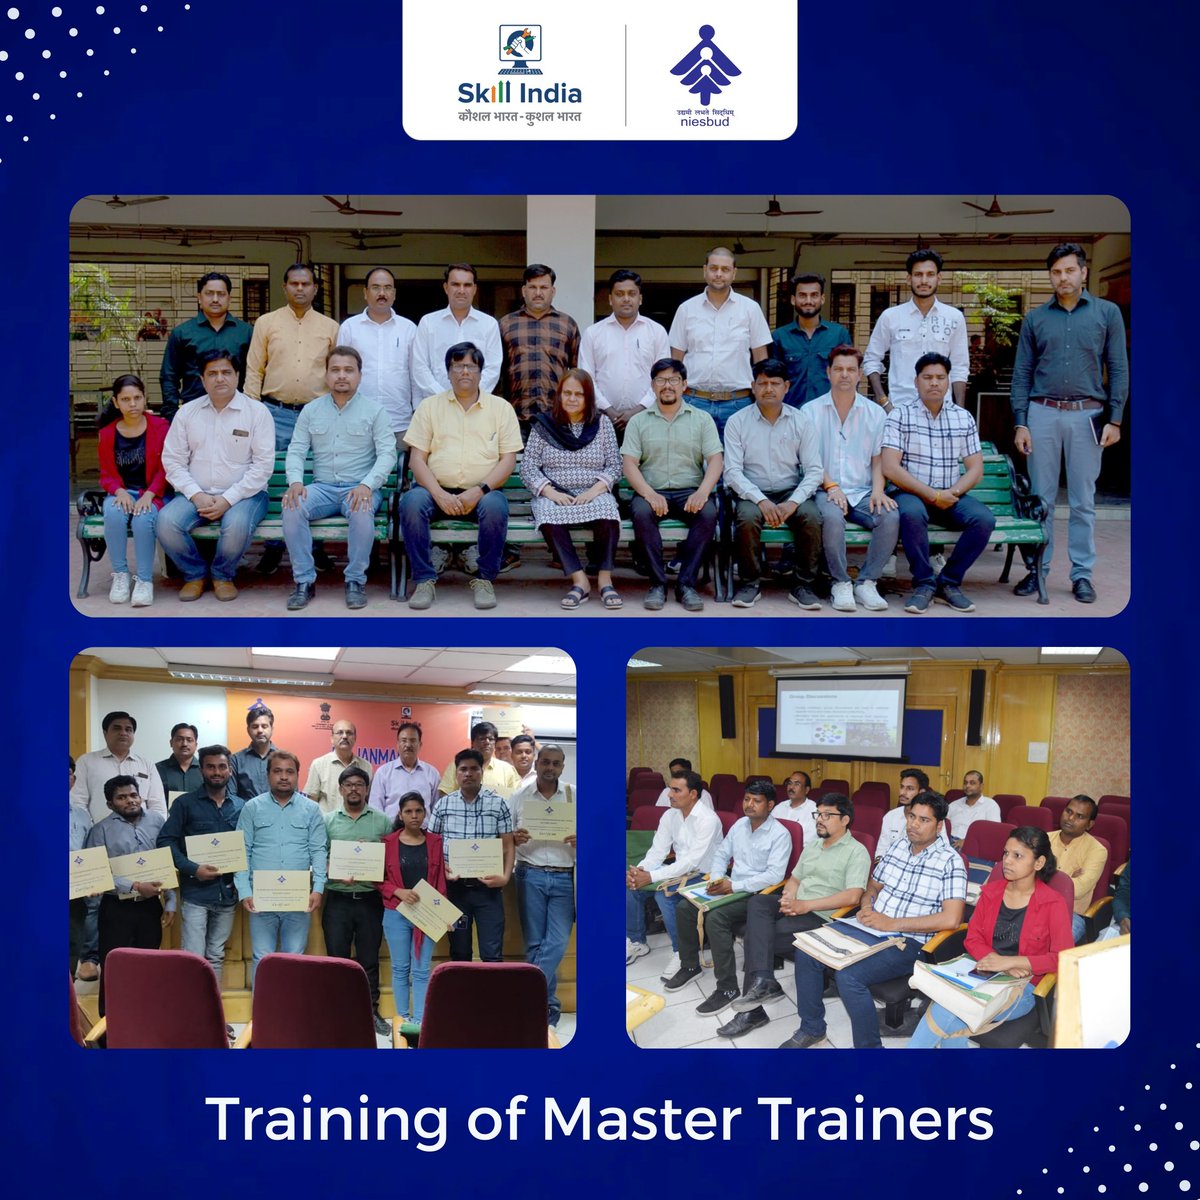 Congratulations to the 20 Master Trainers from Madhya Pradesh for completing their training under JANMAN scheme at NIESBUD Noida. Your dedication is paving the way for a skilled workforce.

#JANMAN #SkillIndia #Skills4All #KushalBharatViksitBharat #Entrepreneurship